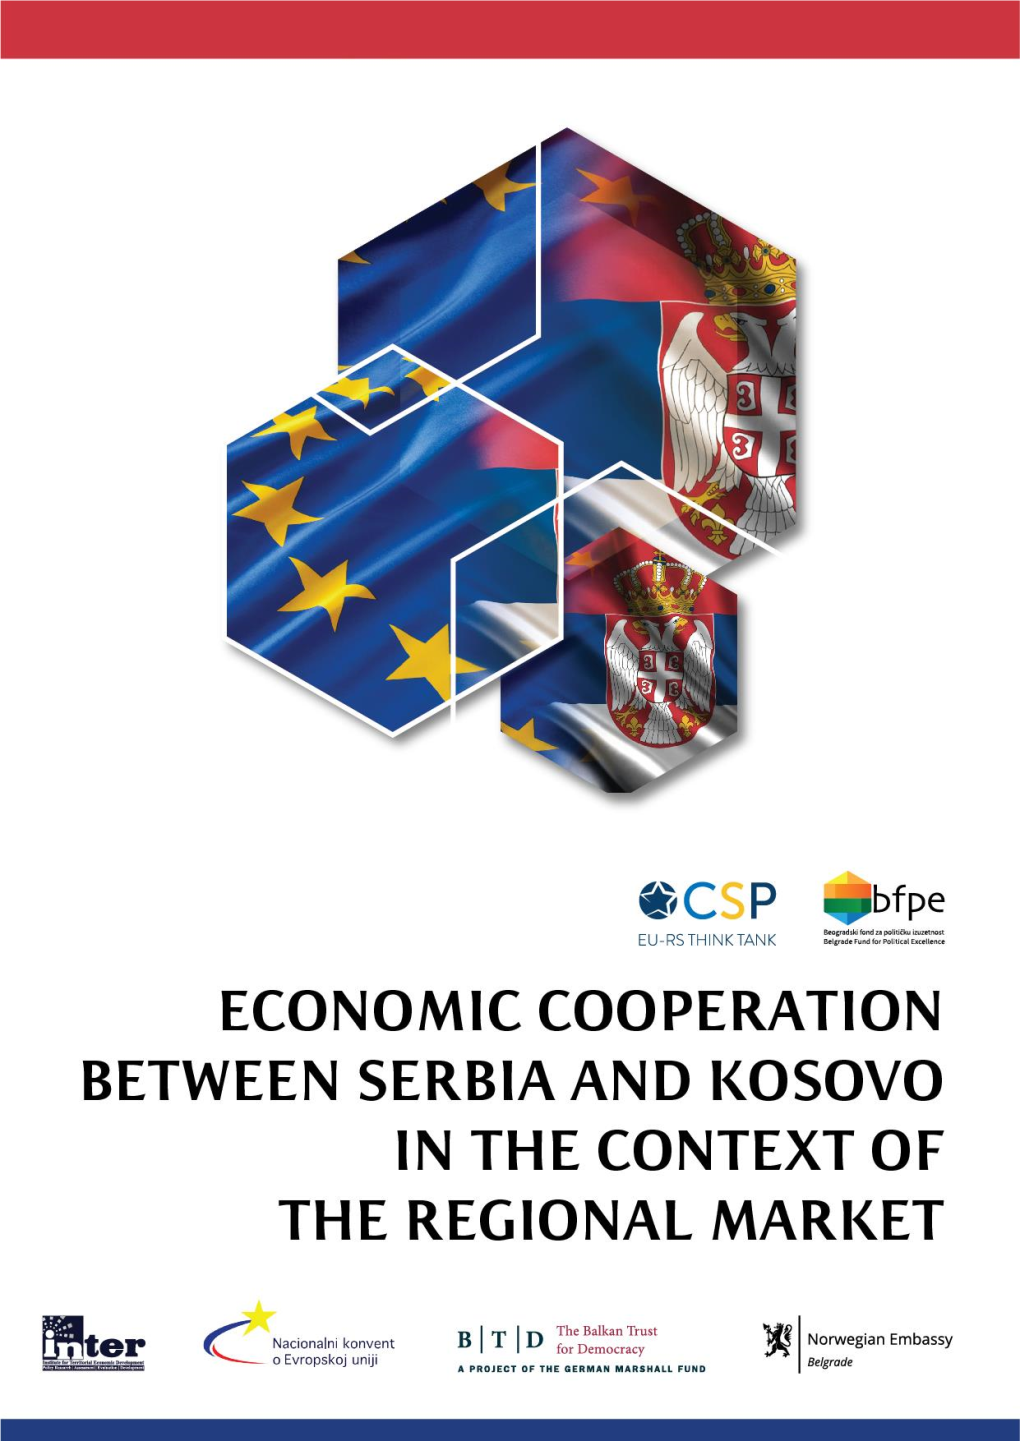 Economic Cooperation Between Serbia and Kosovo in the Context of the Regional Market